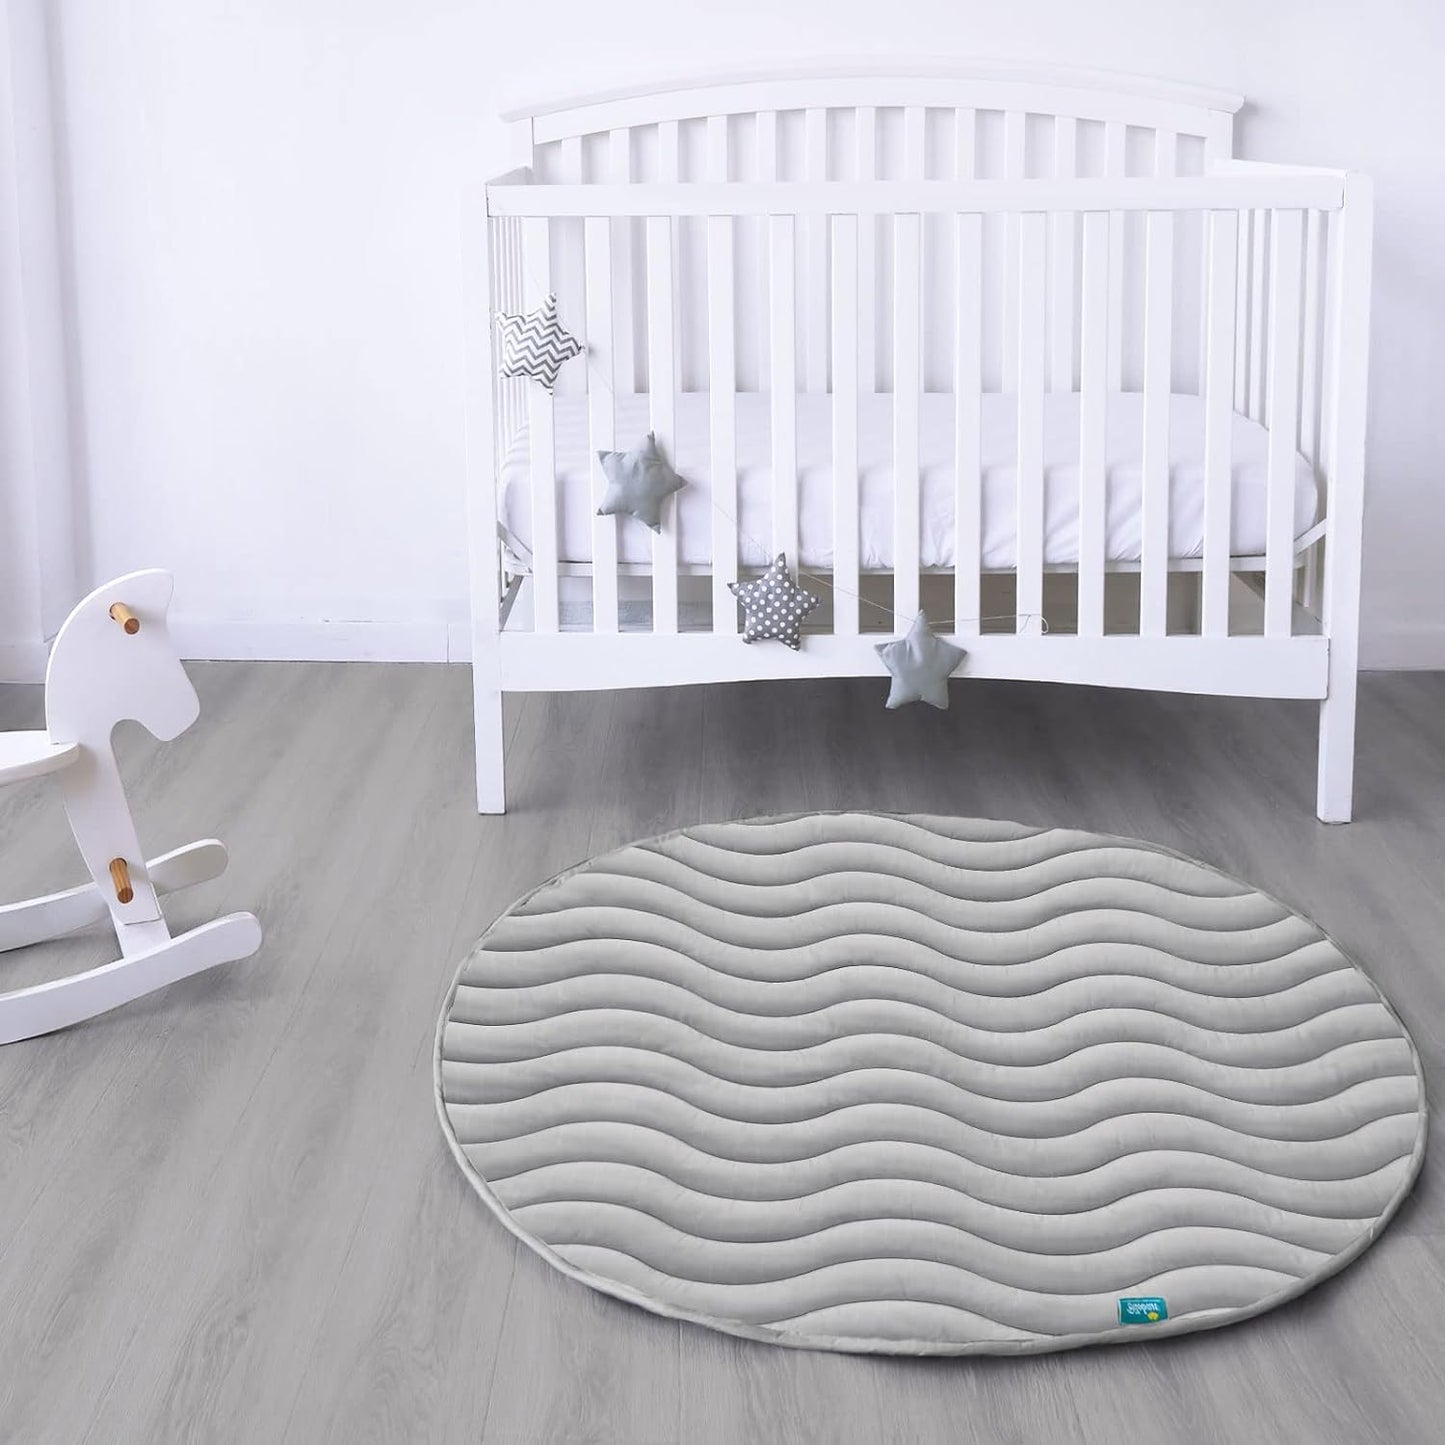 Muslin Baby Play Mat - Round 47'' x 47'', Padded Tummy Time Activity Mat for Infant & Toddler, Intricate Wave Quilted, Grey